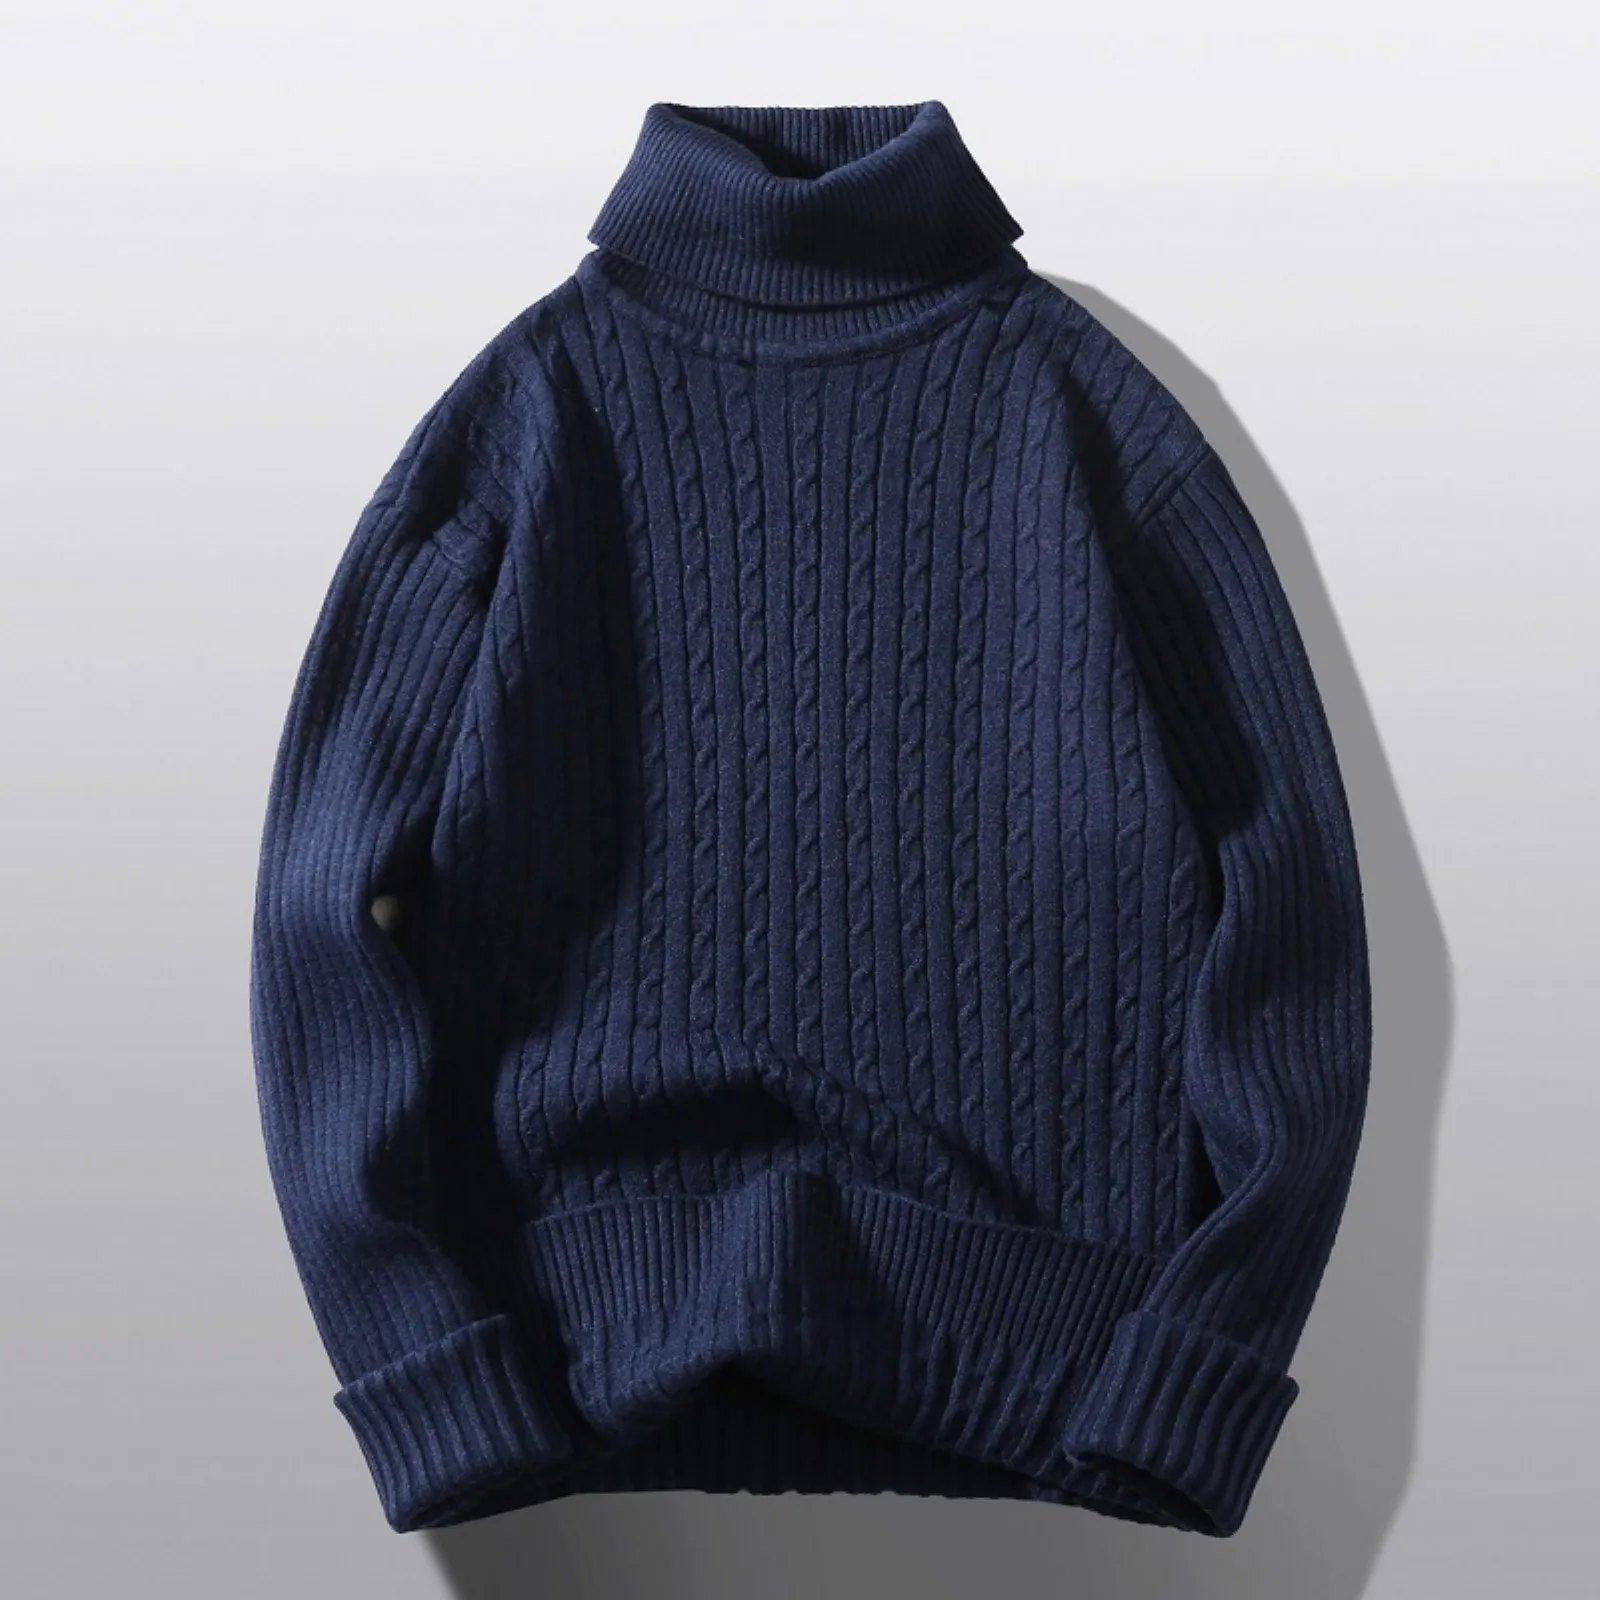 

Vintage Solid Color Knitwear Turtleneck Mens Sweaters Fashion Twist Knitwear Autumn And Winter Long Sleeves Basic Style Tops